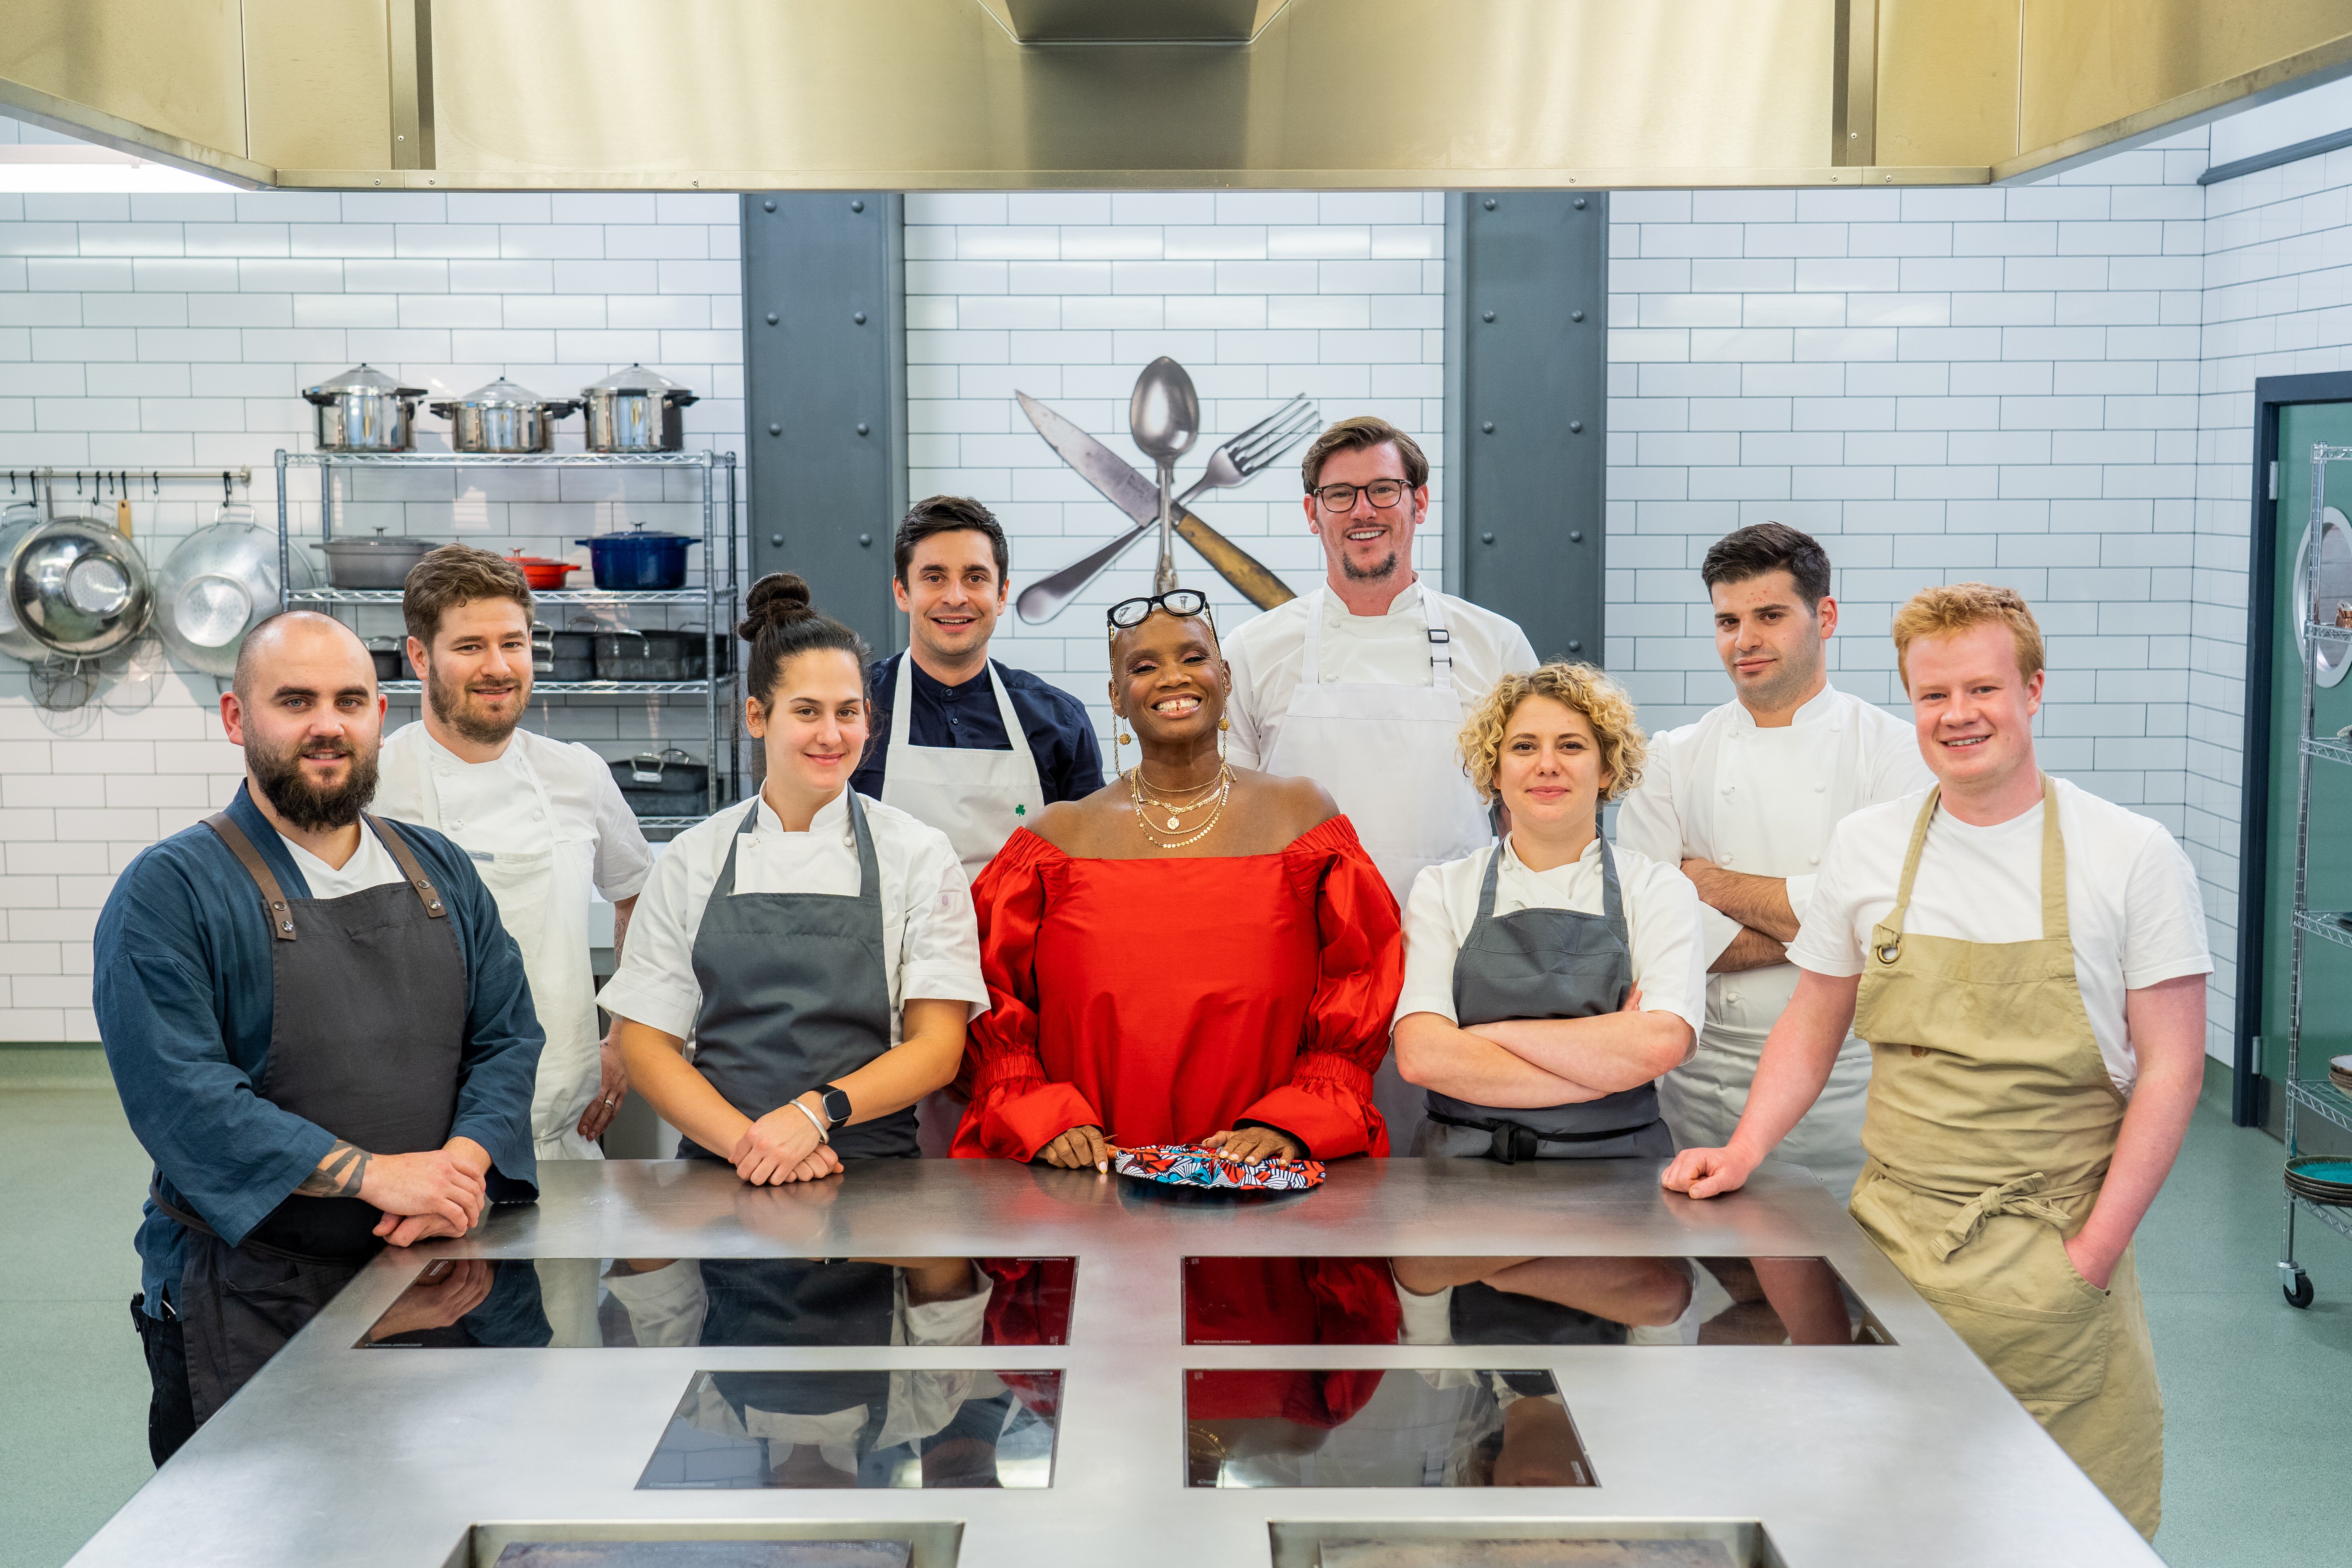 Double win for Great British Menu main course chef